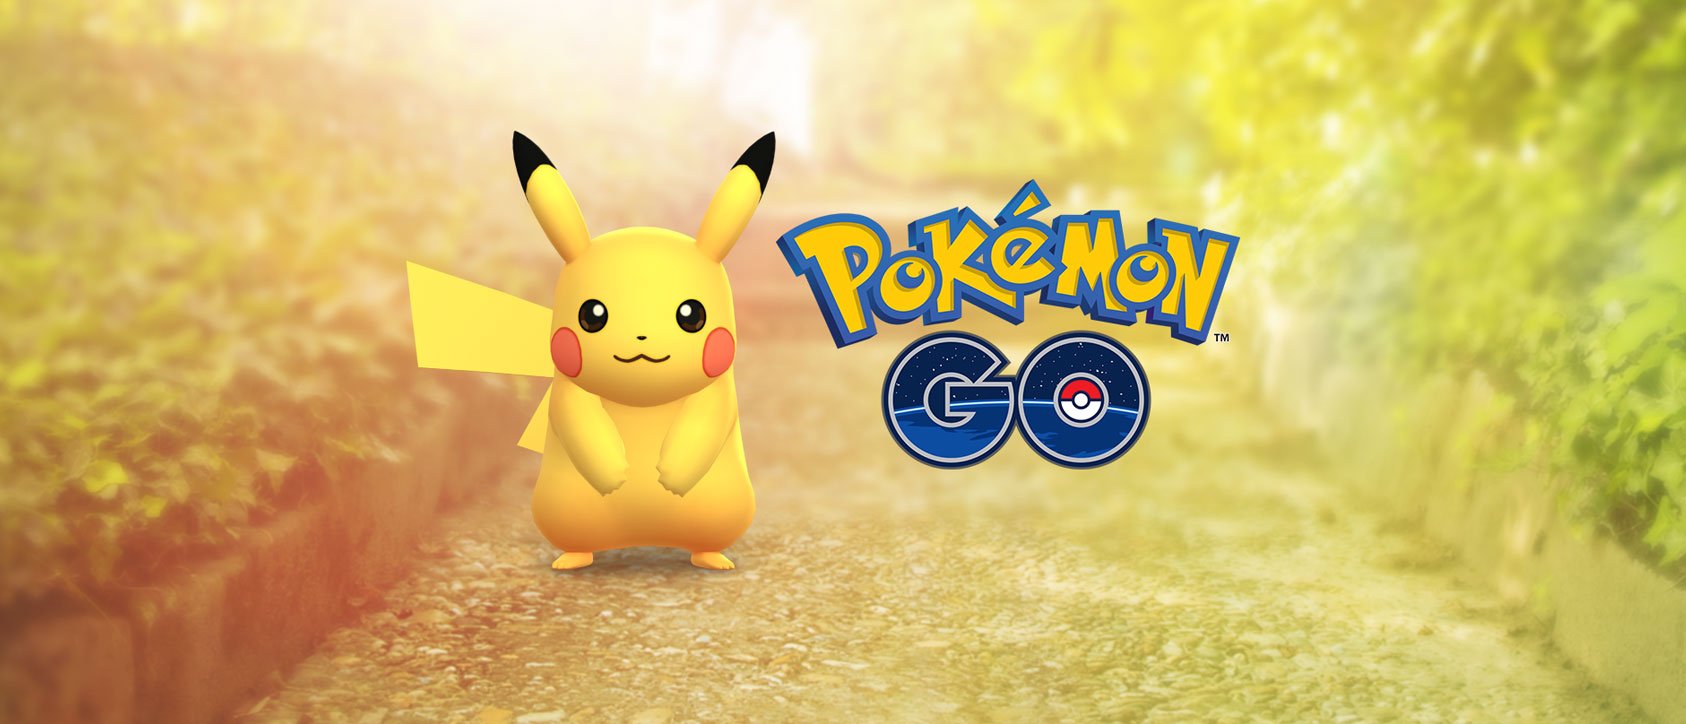 Pokémon Go players can now redeem promo codes online | iMore